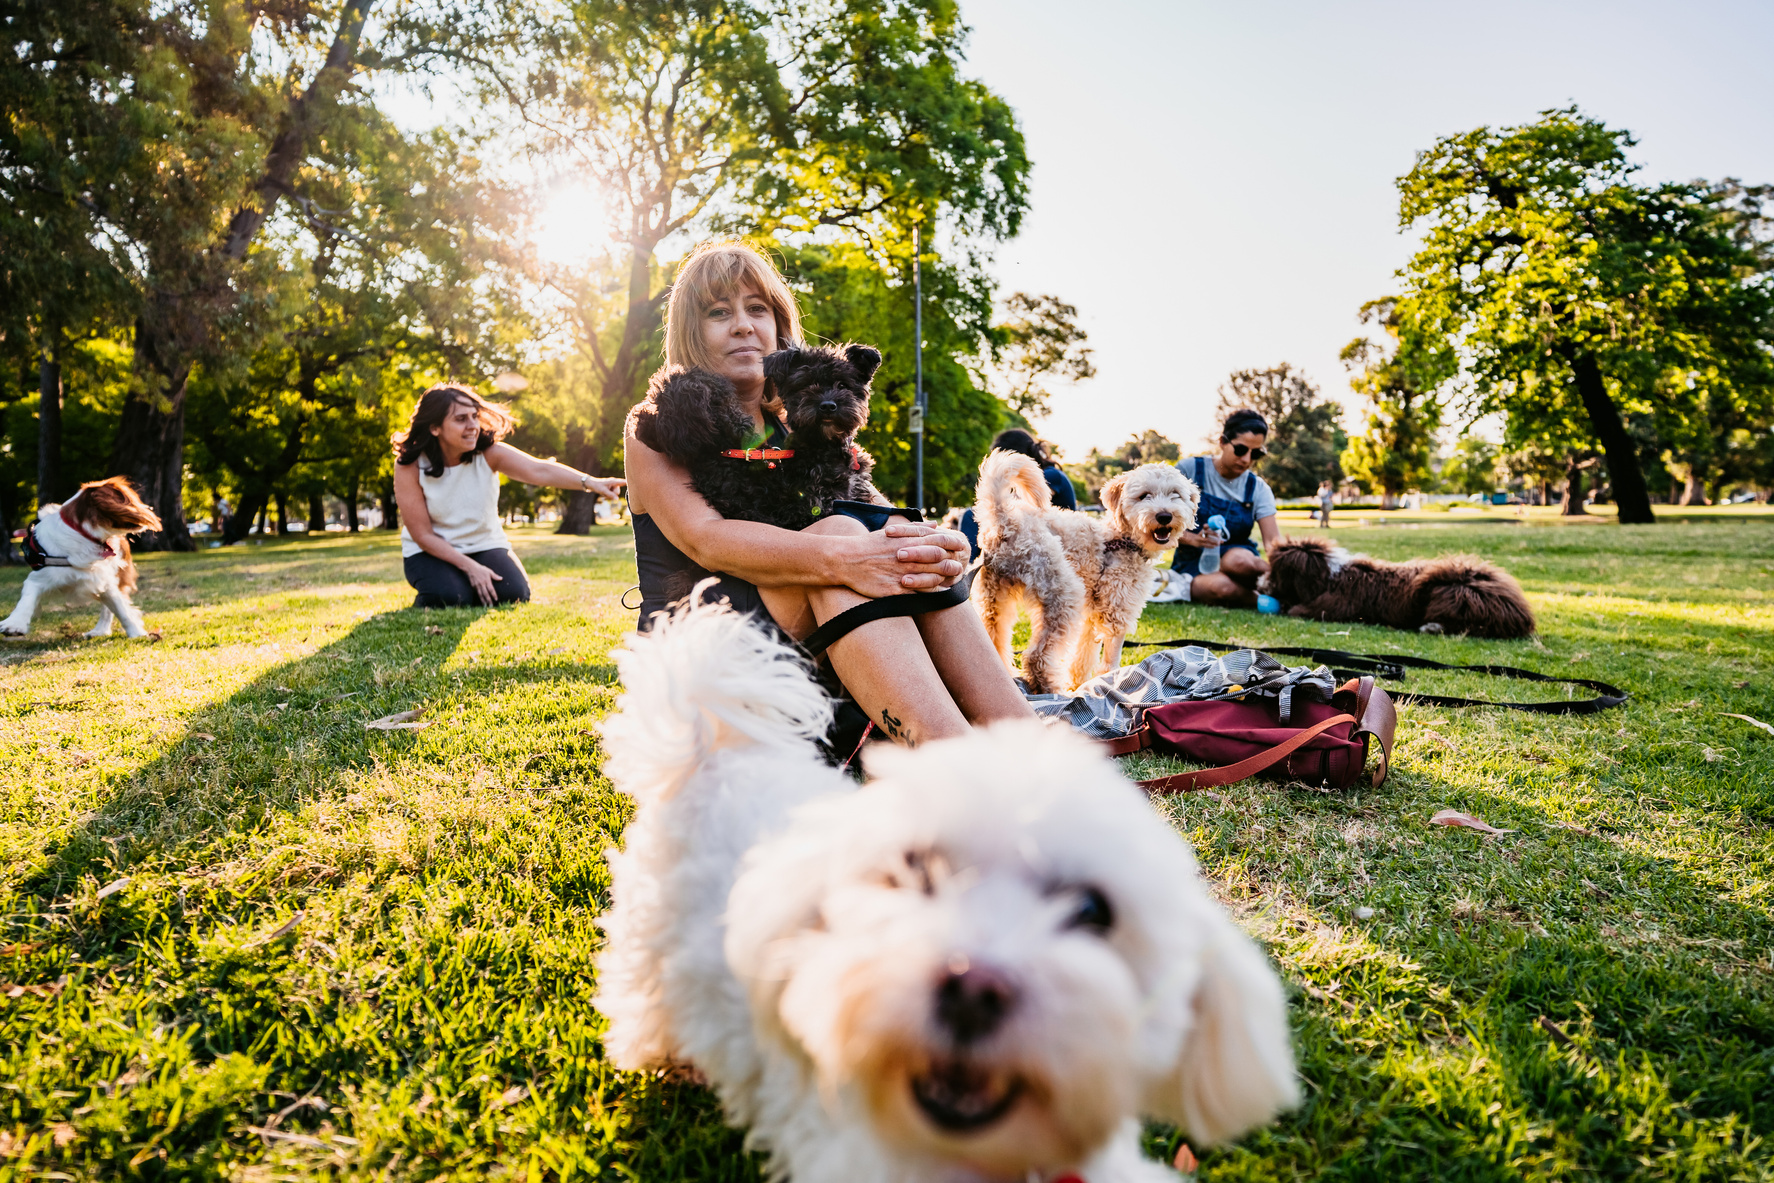 Group of people with dogs in park